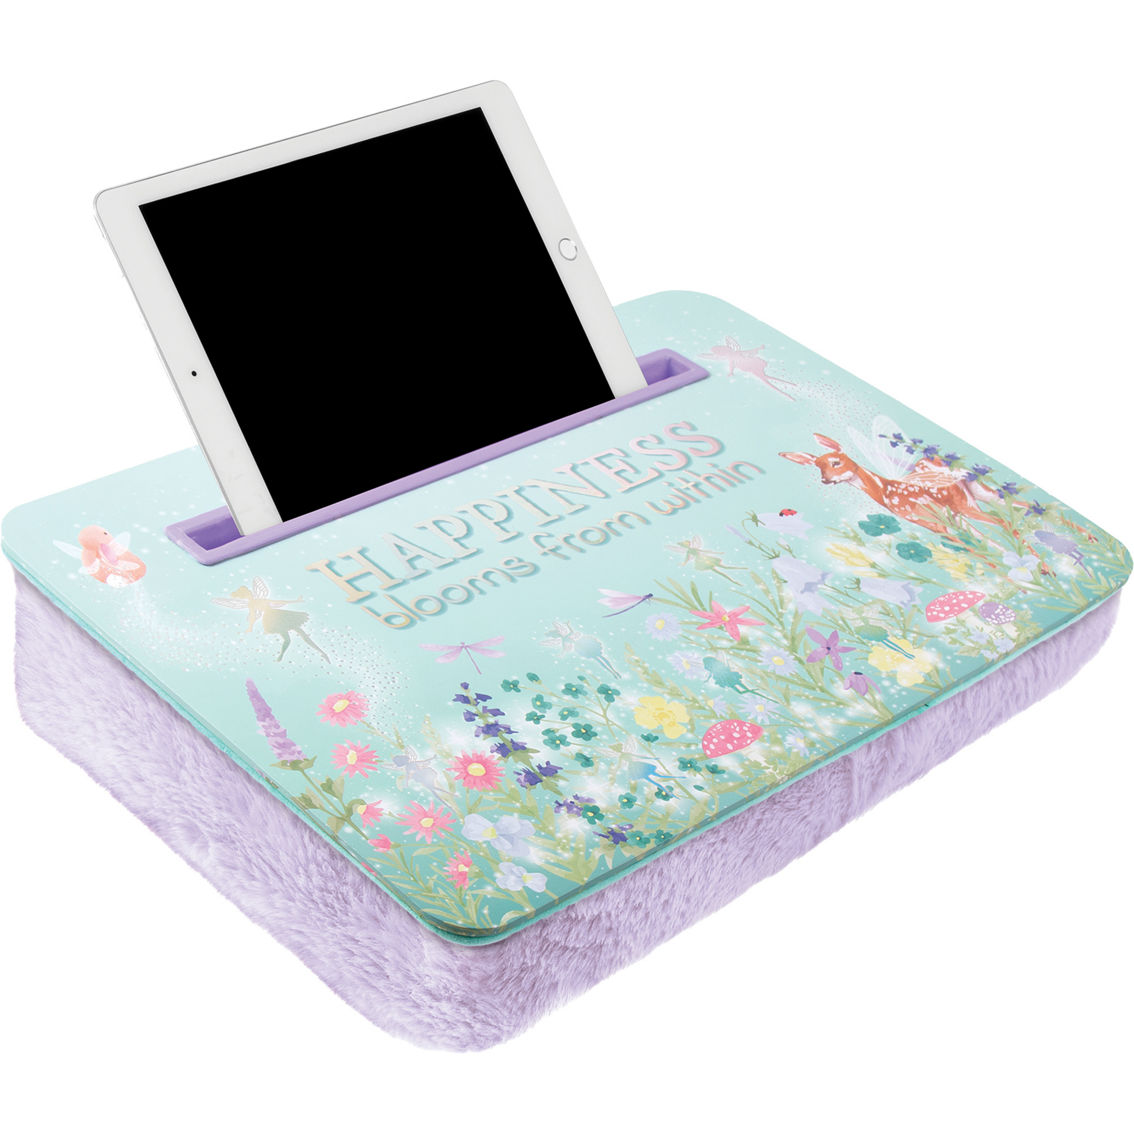 Make It Real Three Cheers for Girls Fairy Garden Lap Desk - Image 4 of 6